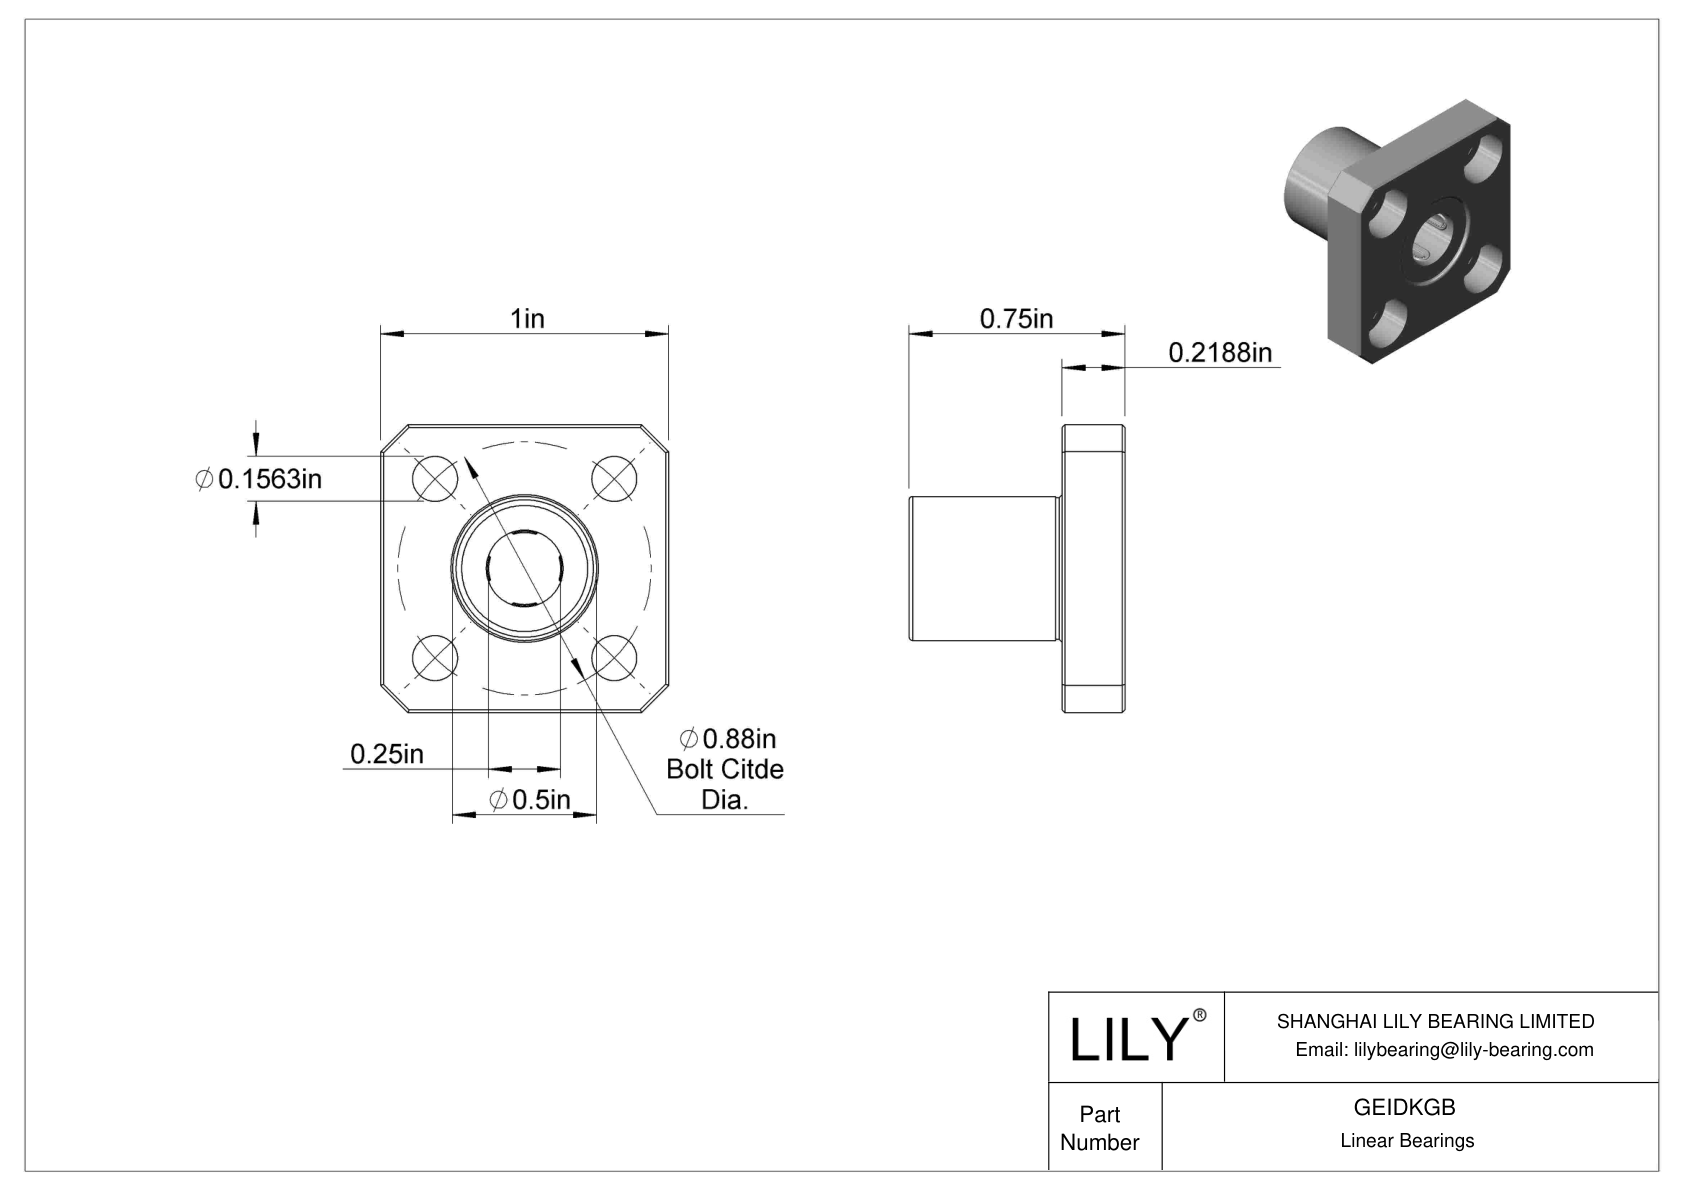 GEIDKGB Flange-Mounted Linear Ball Bearings cad drawing